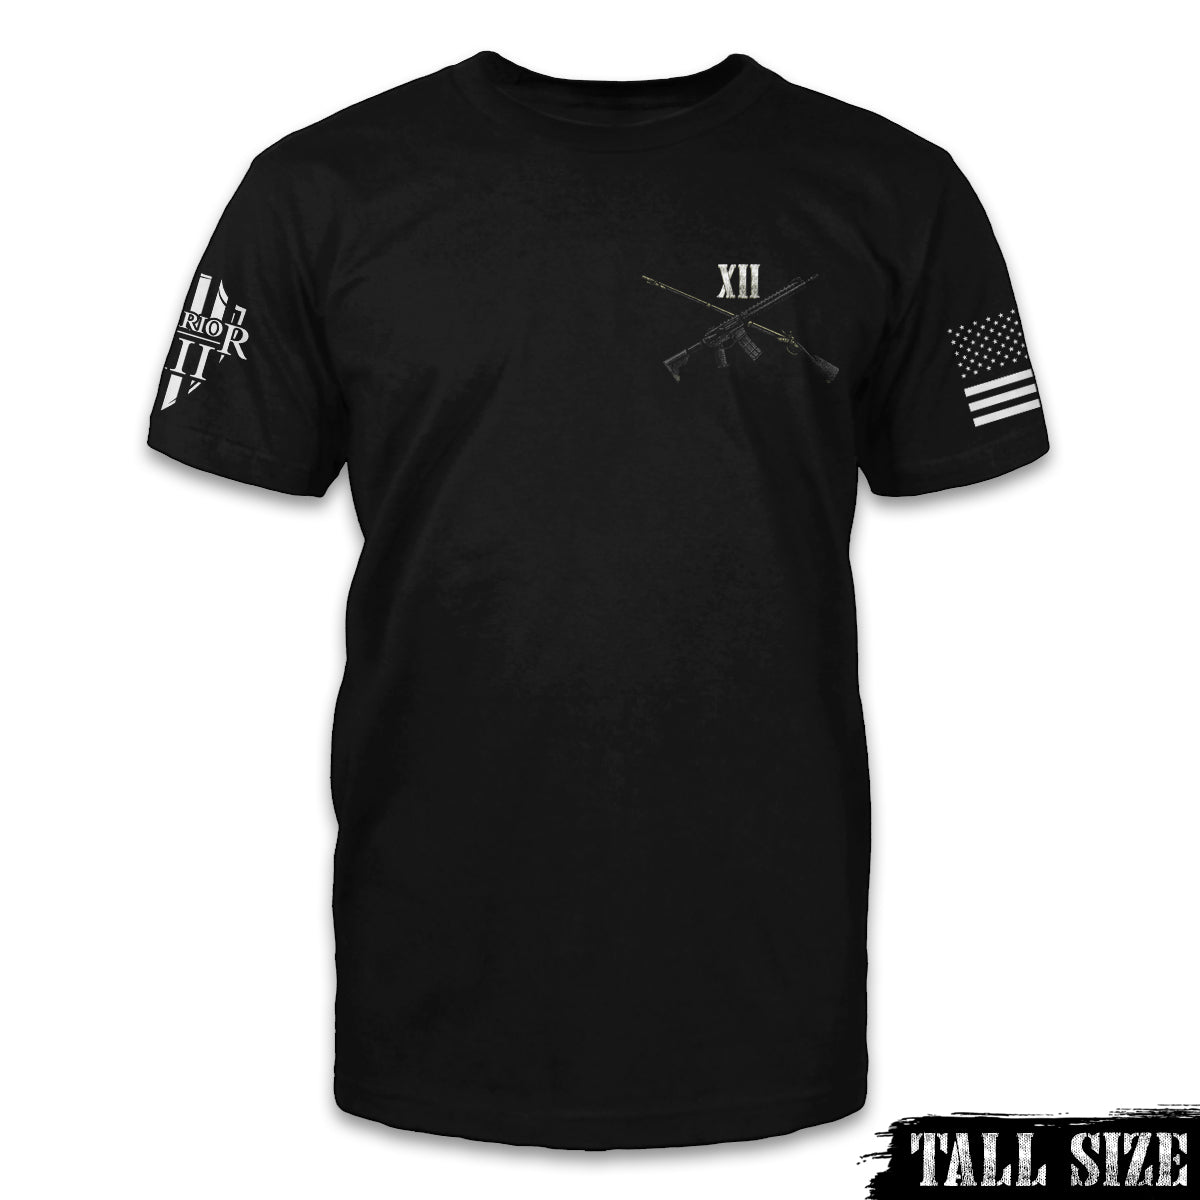 A black tall size shirt with two guns crossed over with the roman numerals XII printed on the front.